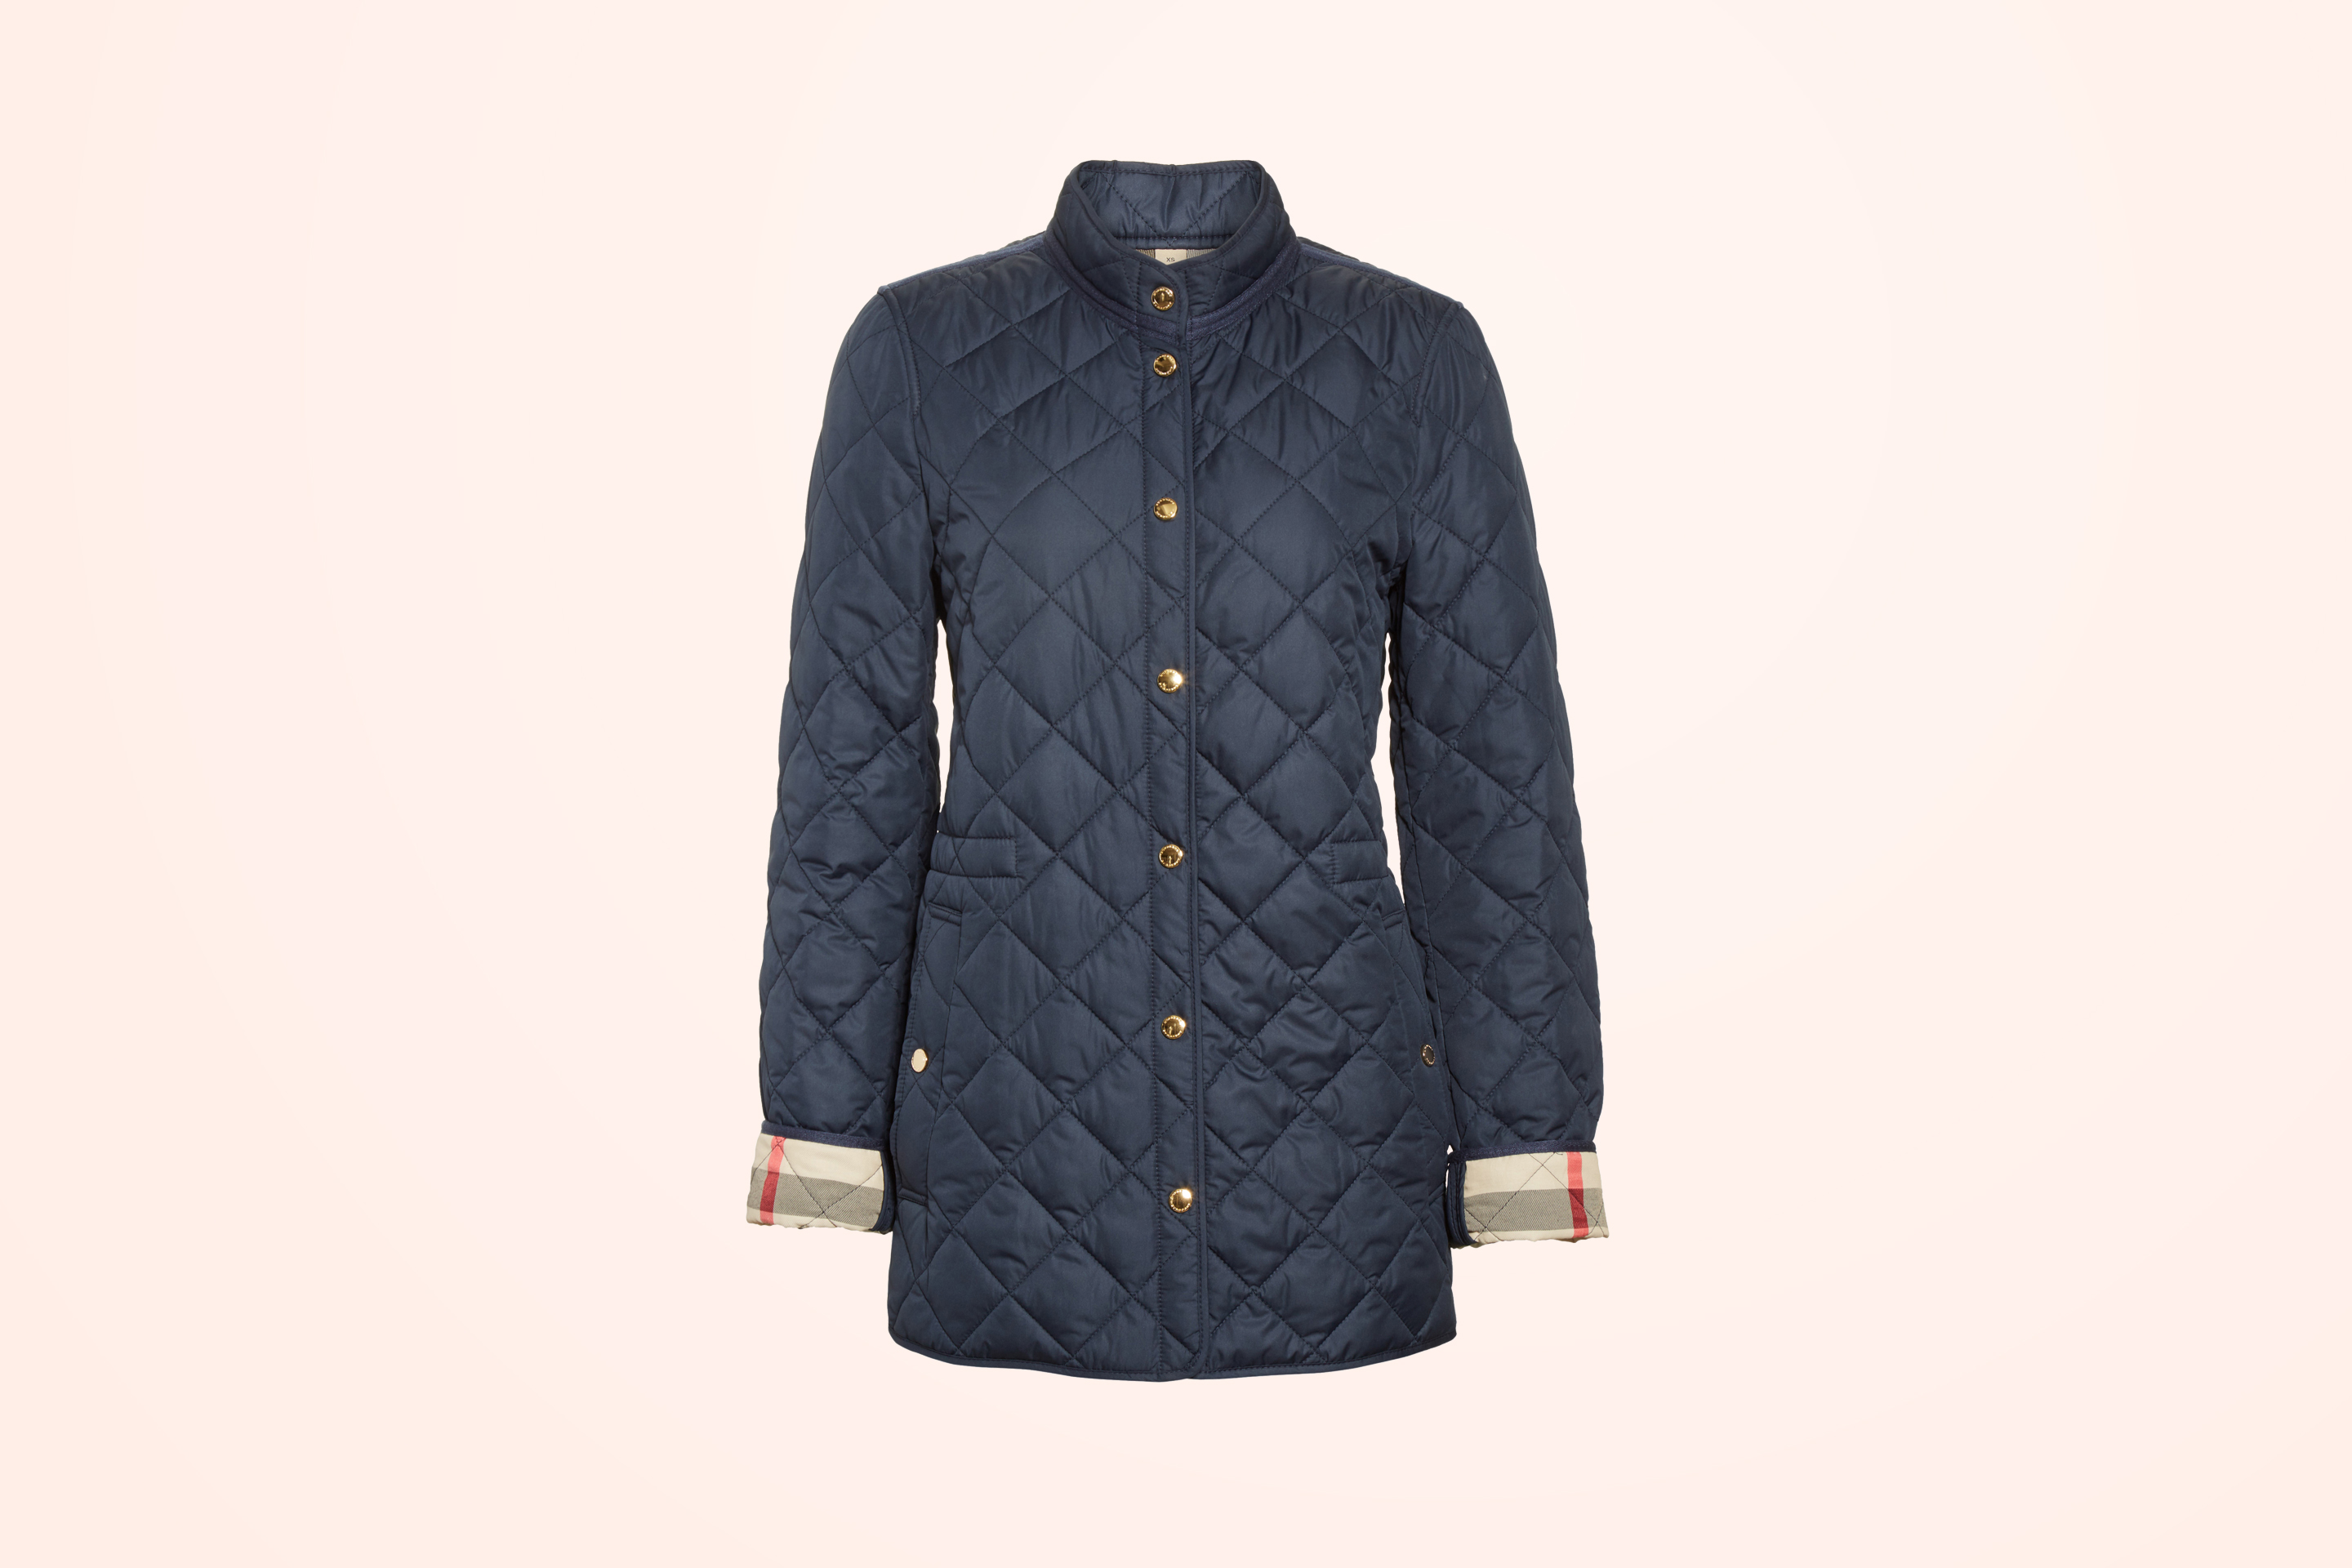 Burberry Ilana Quilted Water Repellent Jacket | Nordstrom | Water repellent  jacket, Fur hood jacket, Jackets